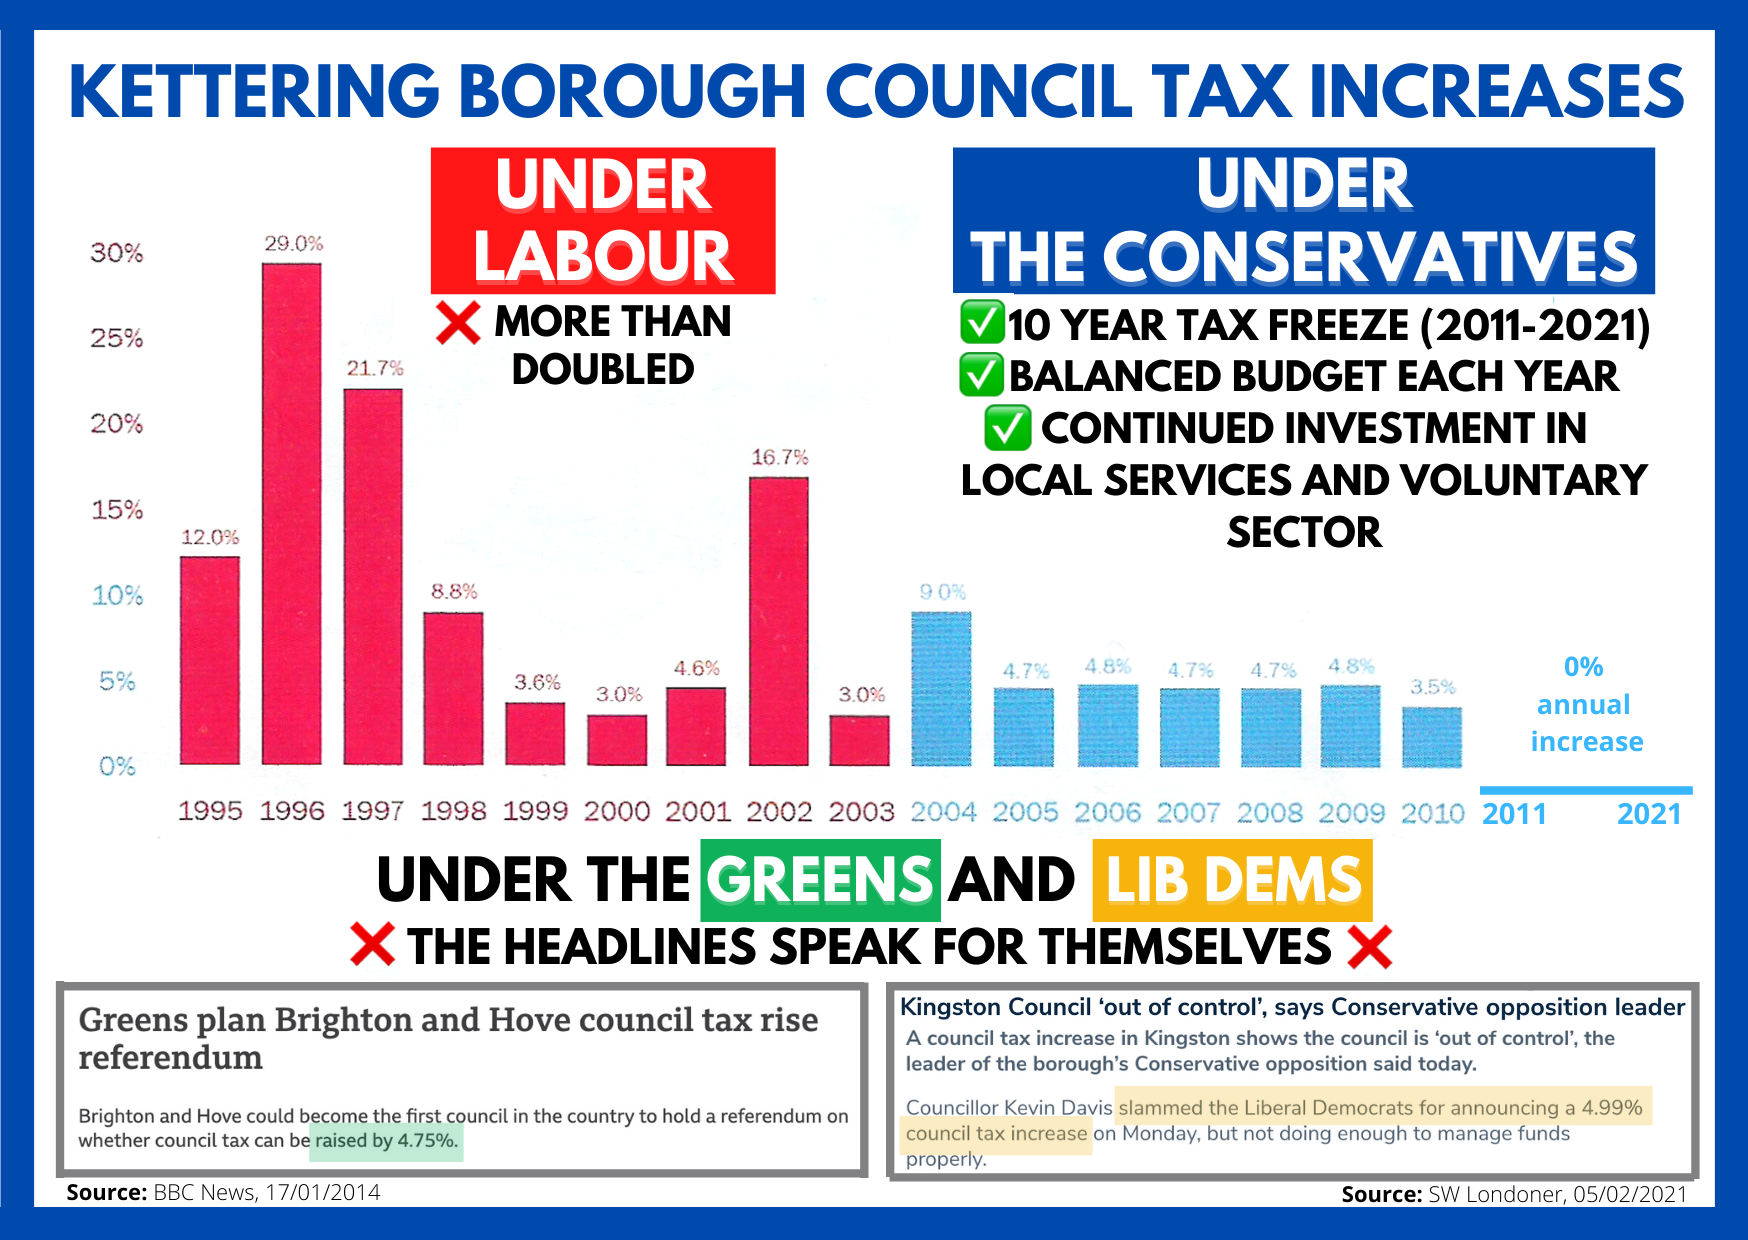 Kettering Borough Council Conservatives administration tax freeze for 10 years